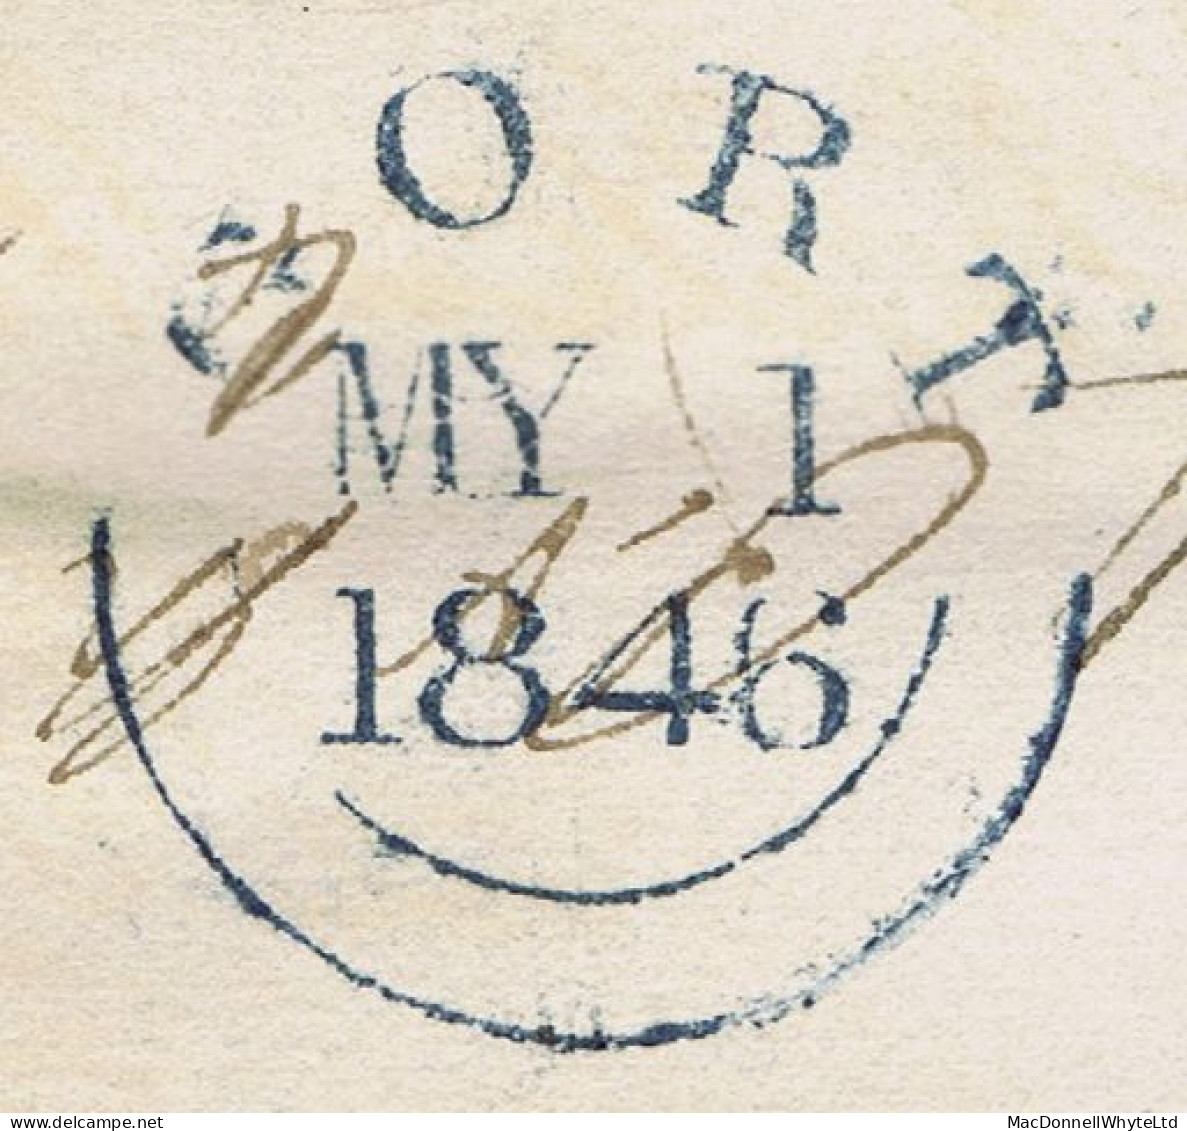 Ireland Galway Uniform Penny Post 1846 Cover To Military Dept London Boxed 2-line PAID AT GORT In Blue, GORT MY 1 1846 - Vorphilatelie